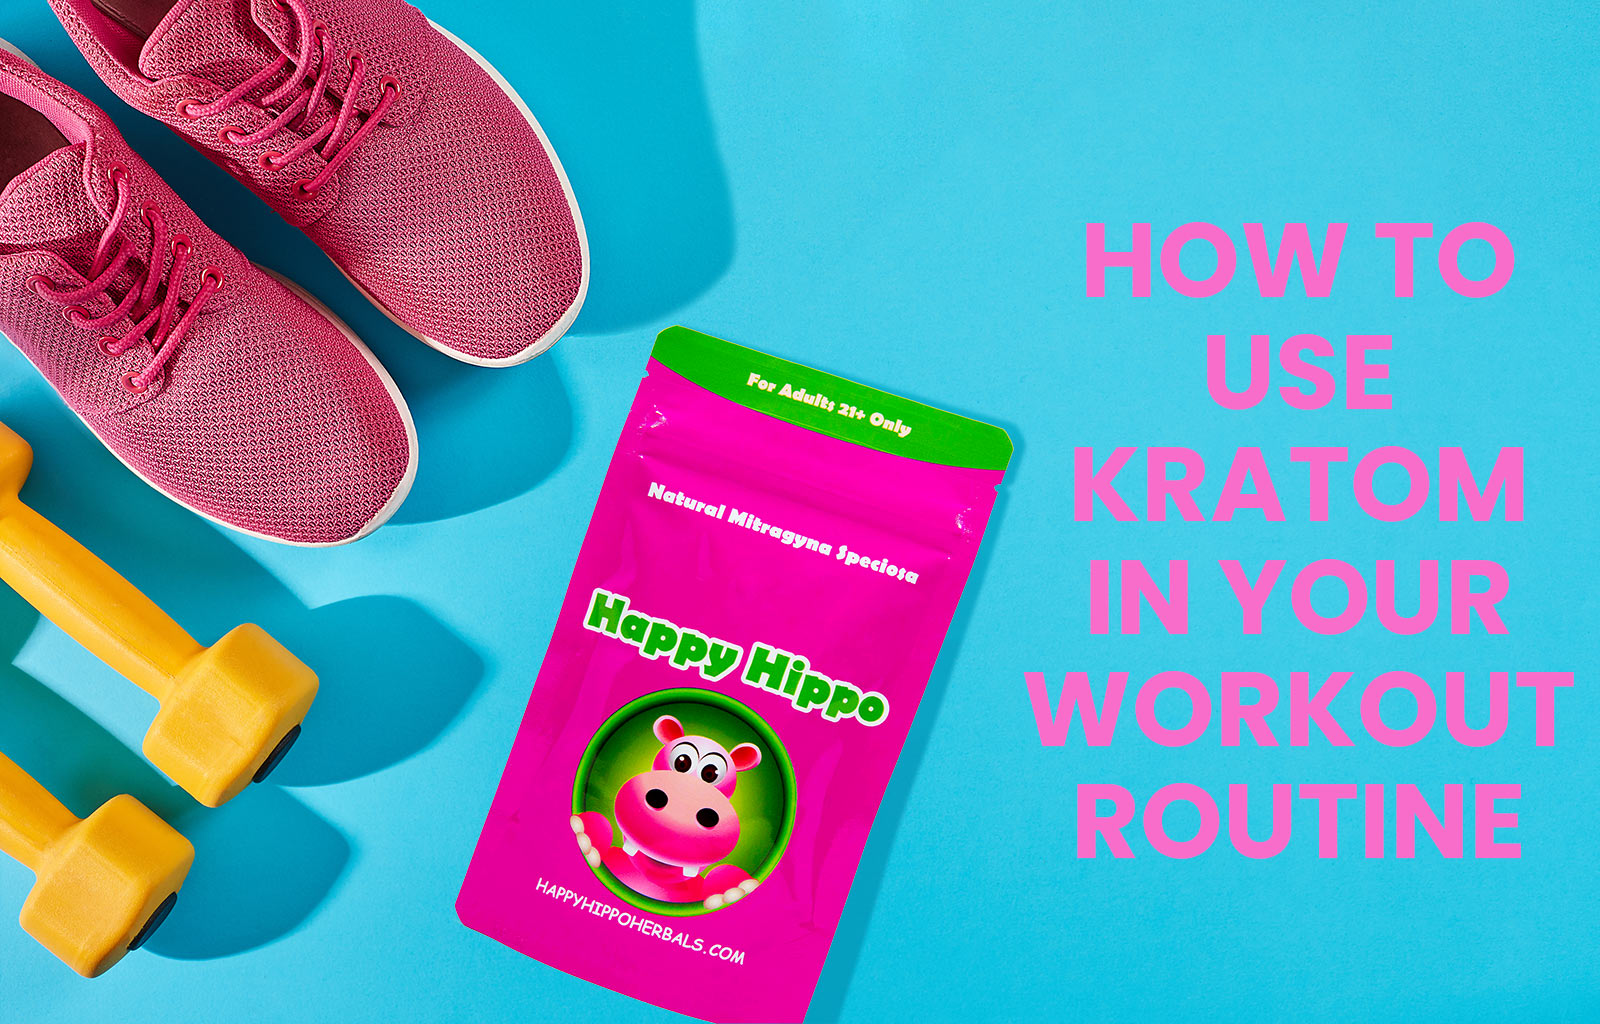 Featured Image depicting gym shoes and a pair of yellow workout weights next to a 4oz bag of Happy Hippo Brand kratom powder - stating How to Use Kratom In your Workout Routine